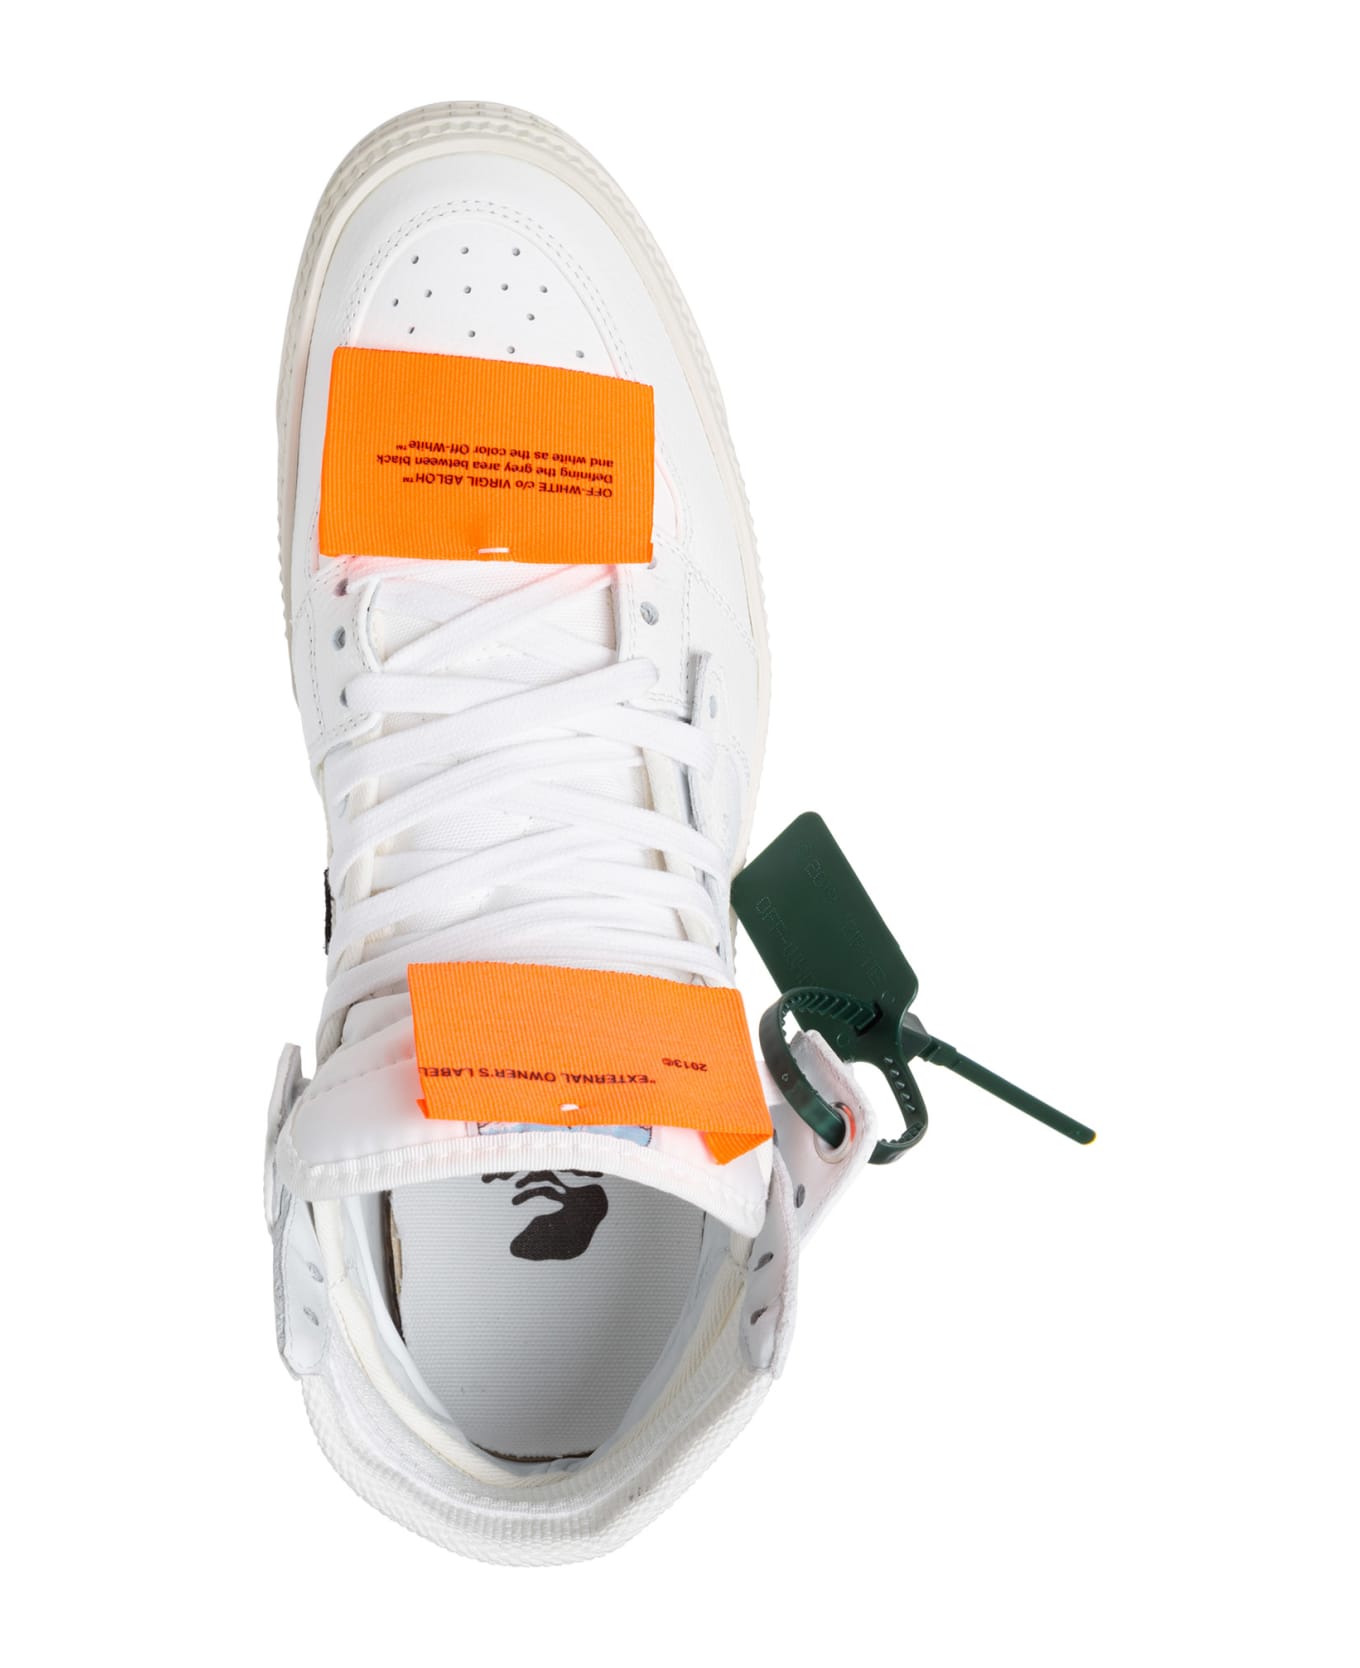 Off-White Off Court 3.0 Leather High-top Sneakers - White